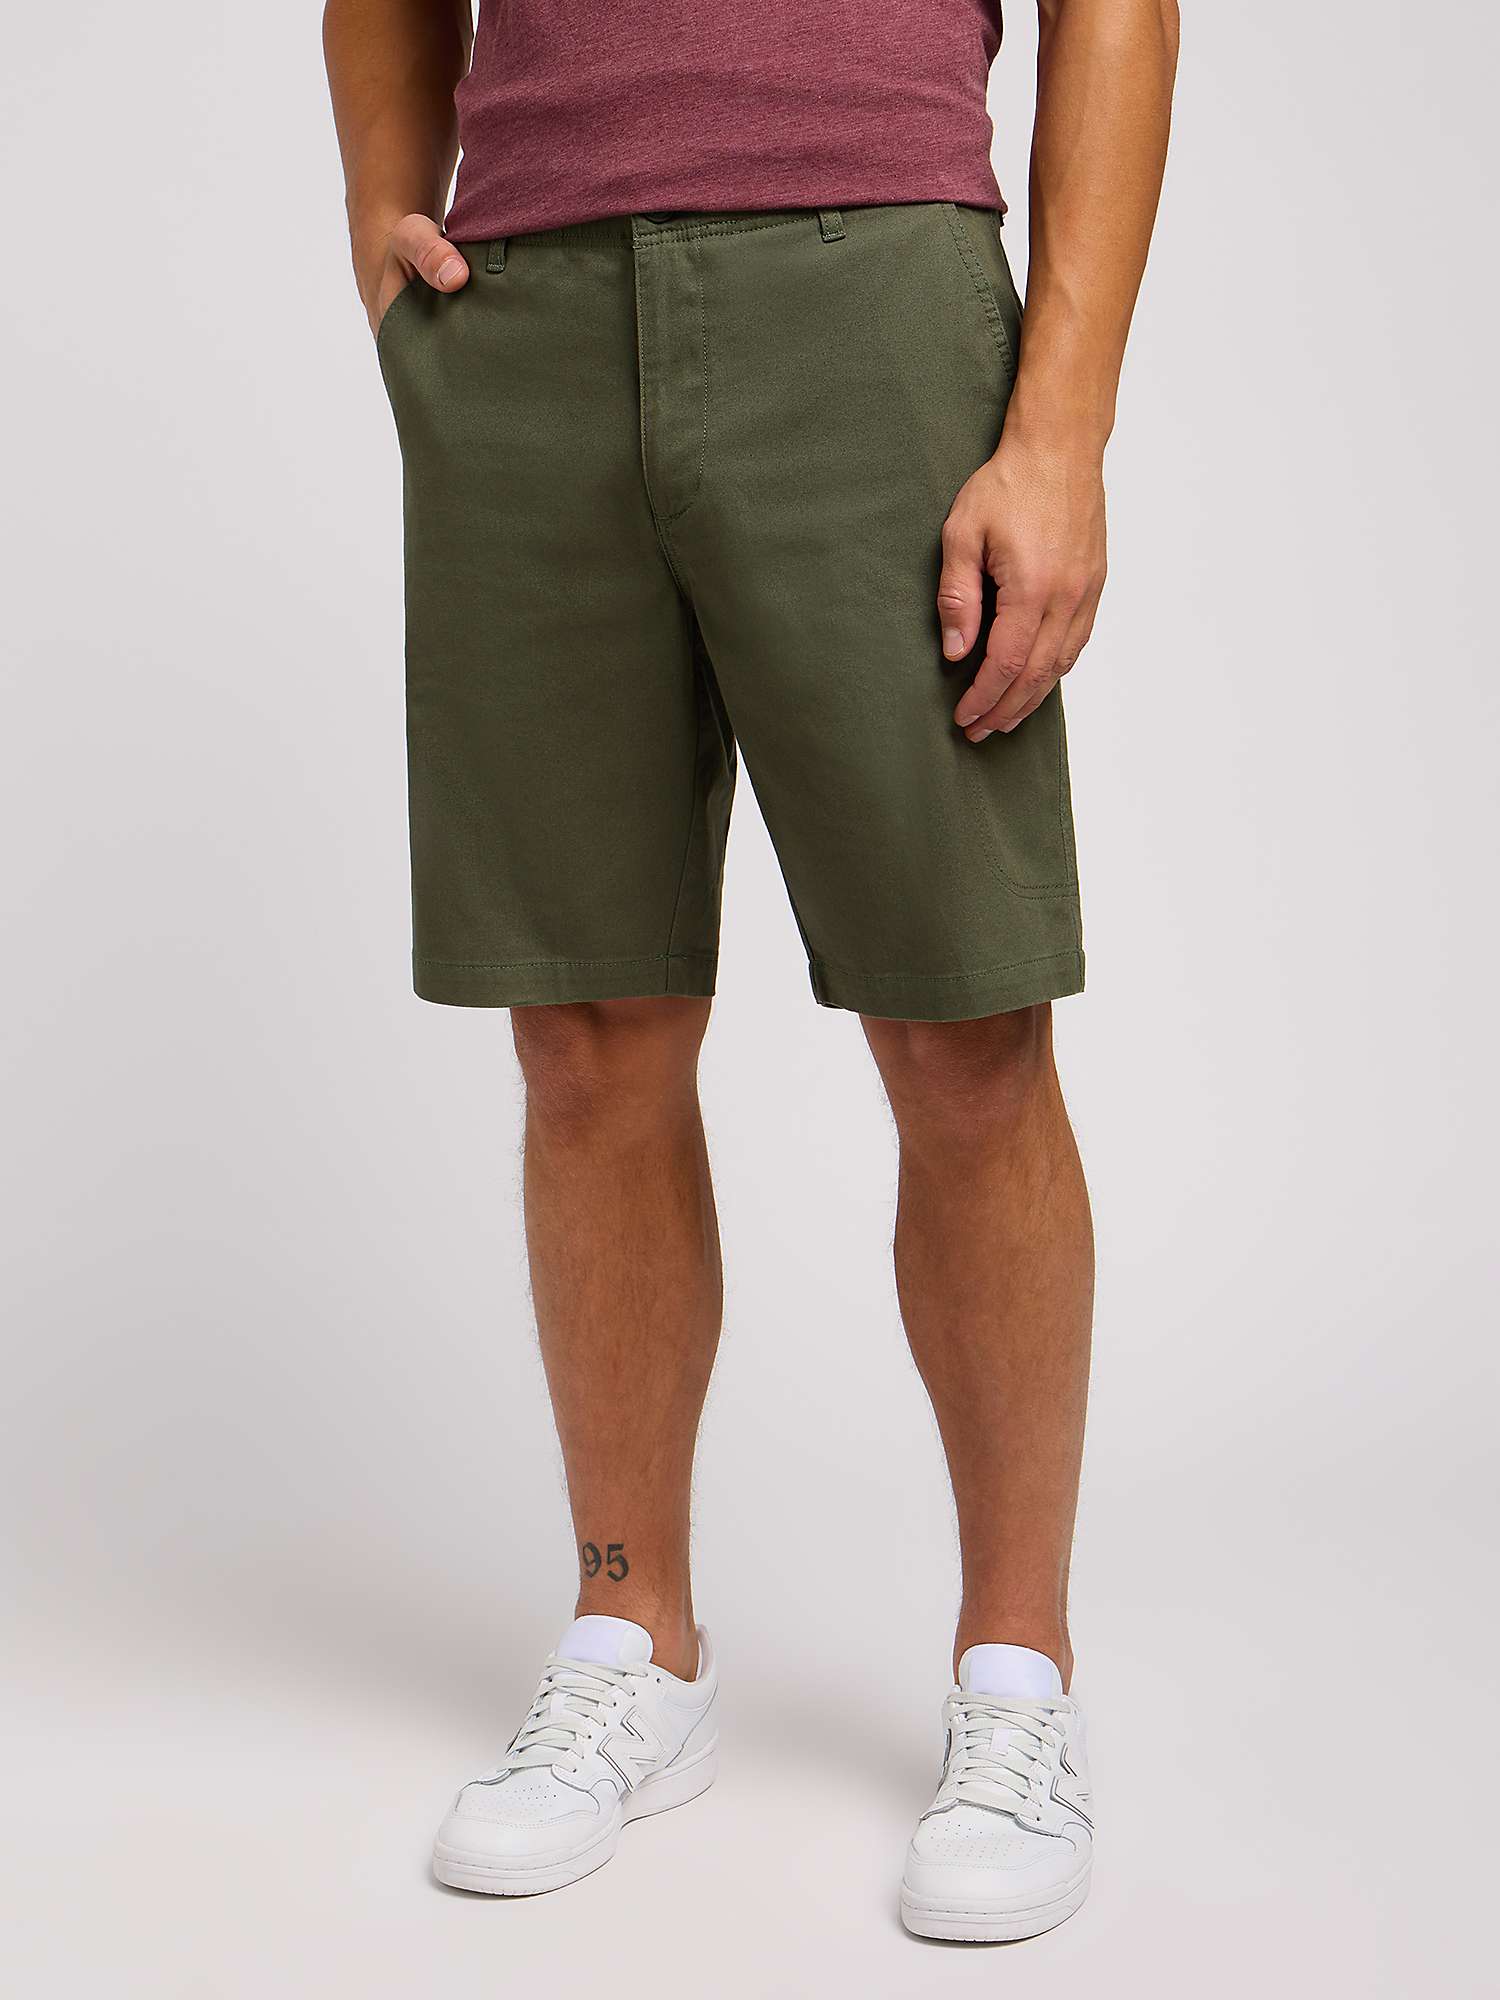 Buy Lee Extreme Movement Workwear Shorts, Olive Grove Online at johnlewis.com